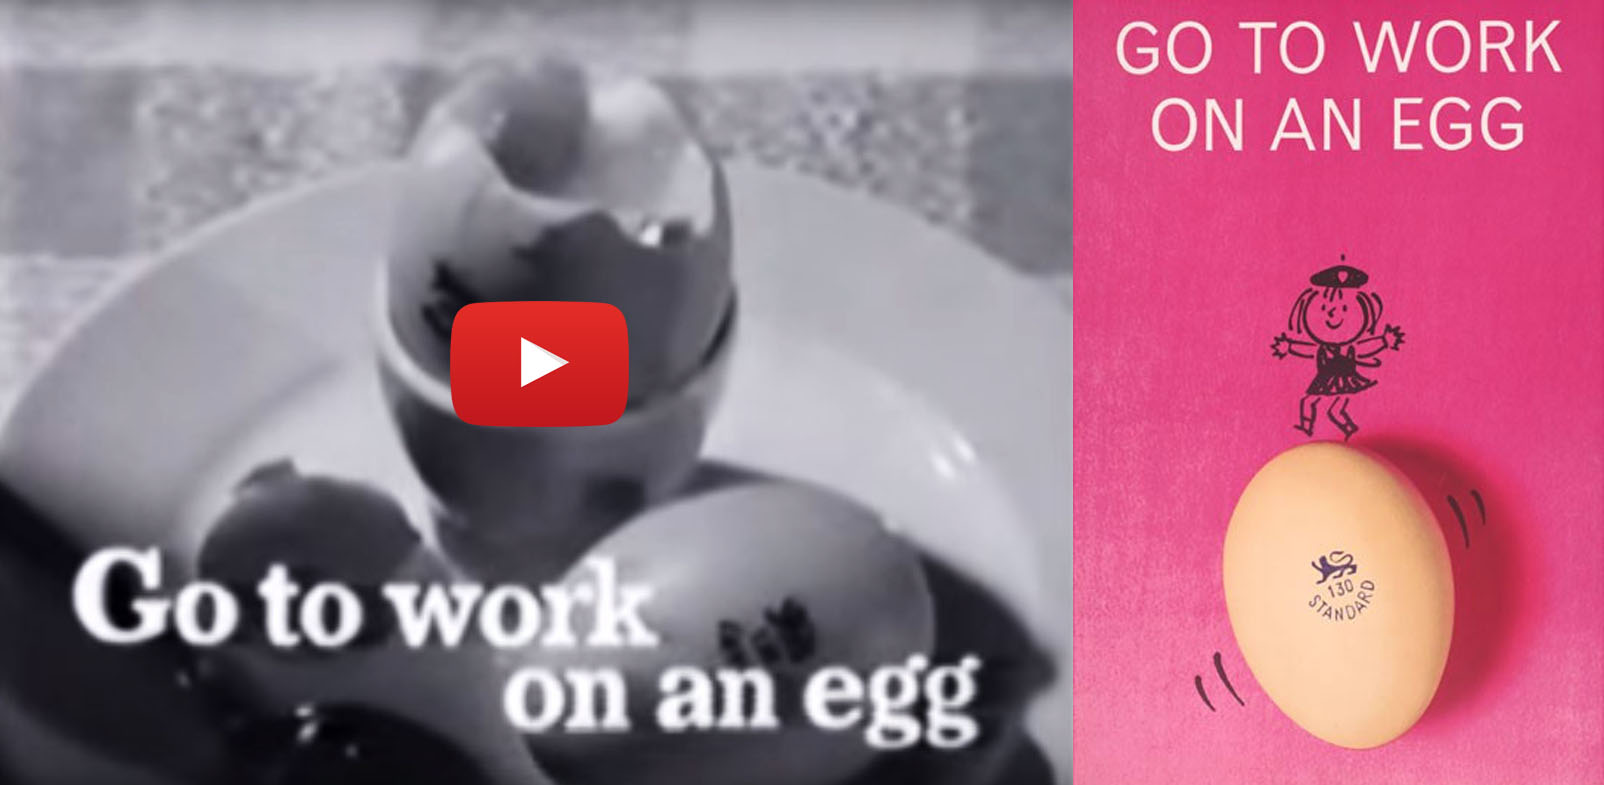 Go to work on an egg